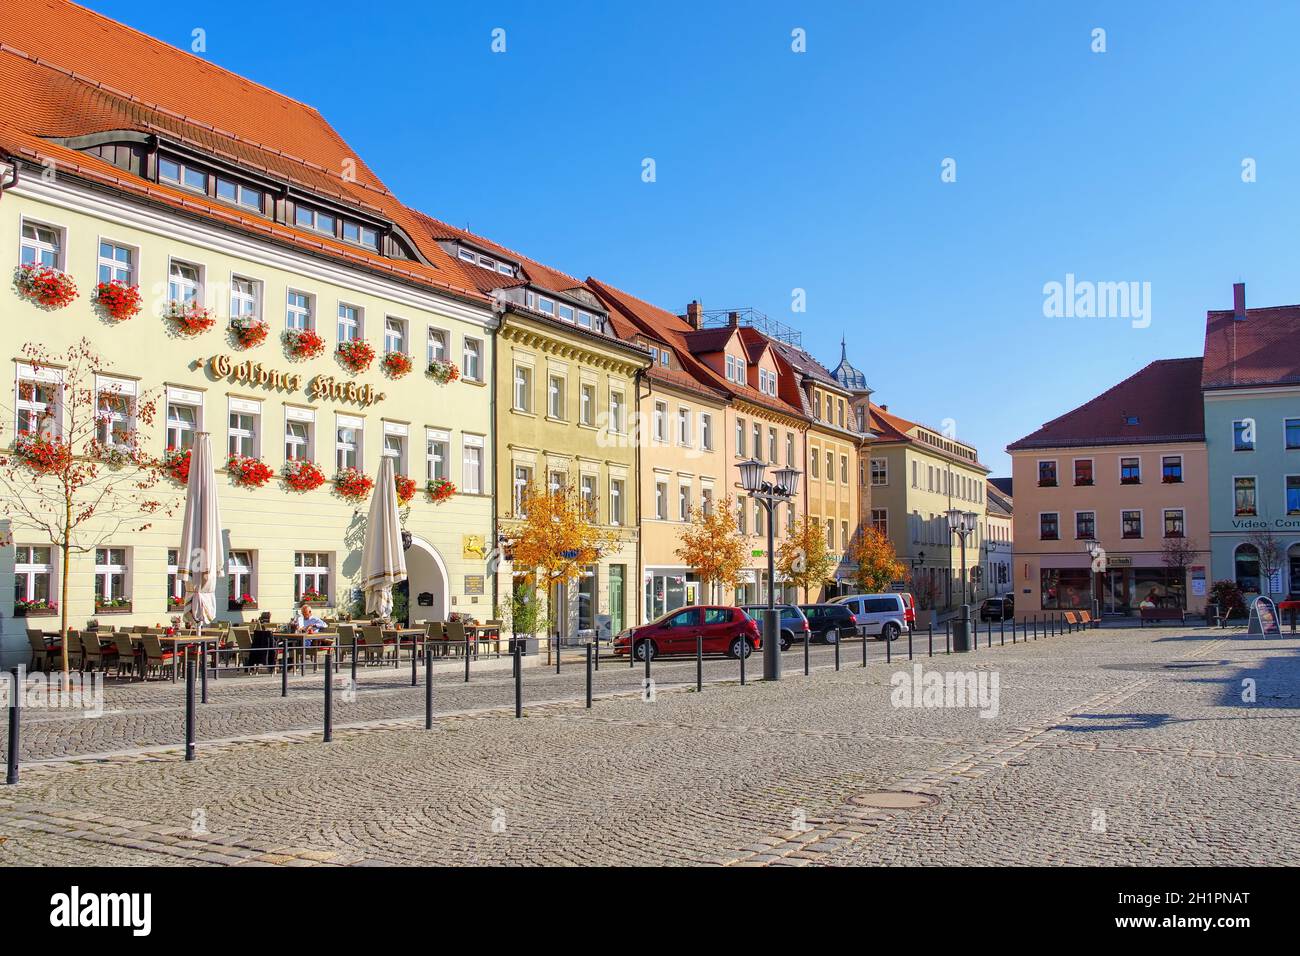 town square in the town Kamenz, Saxony in Germany Stock Photo